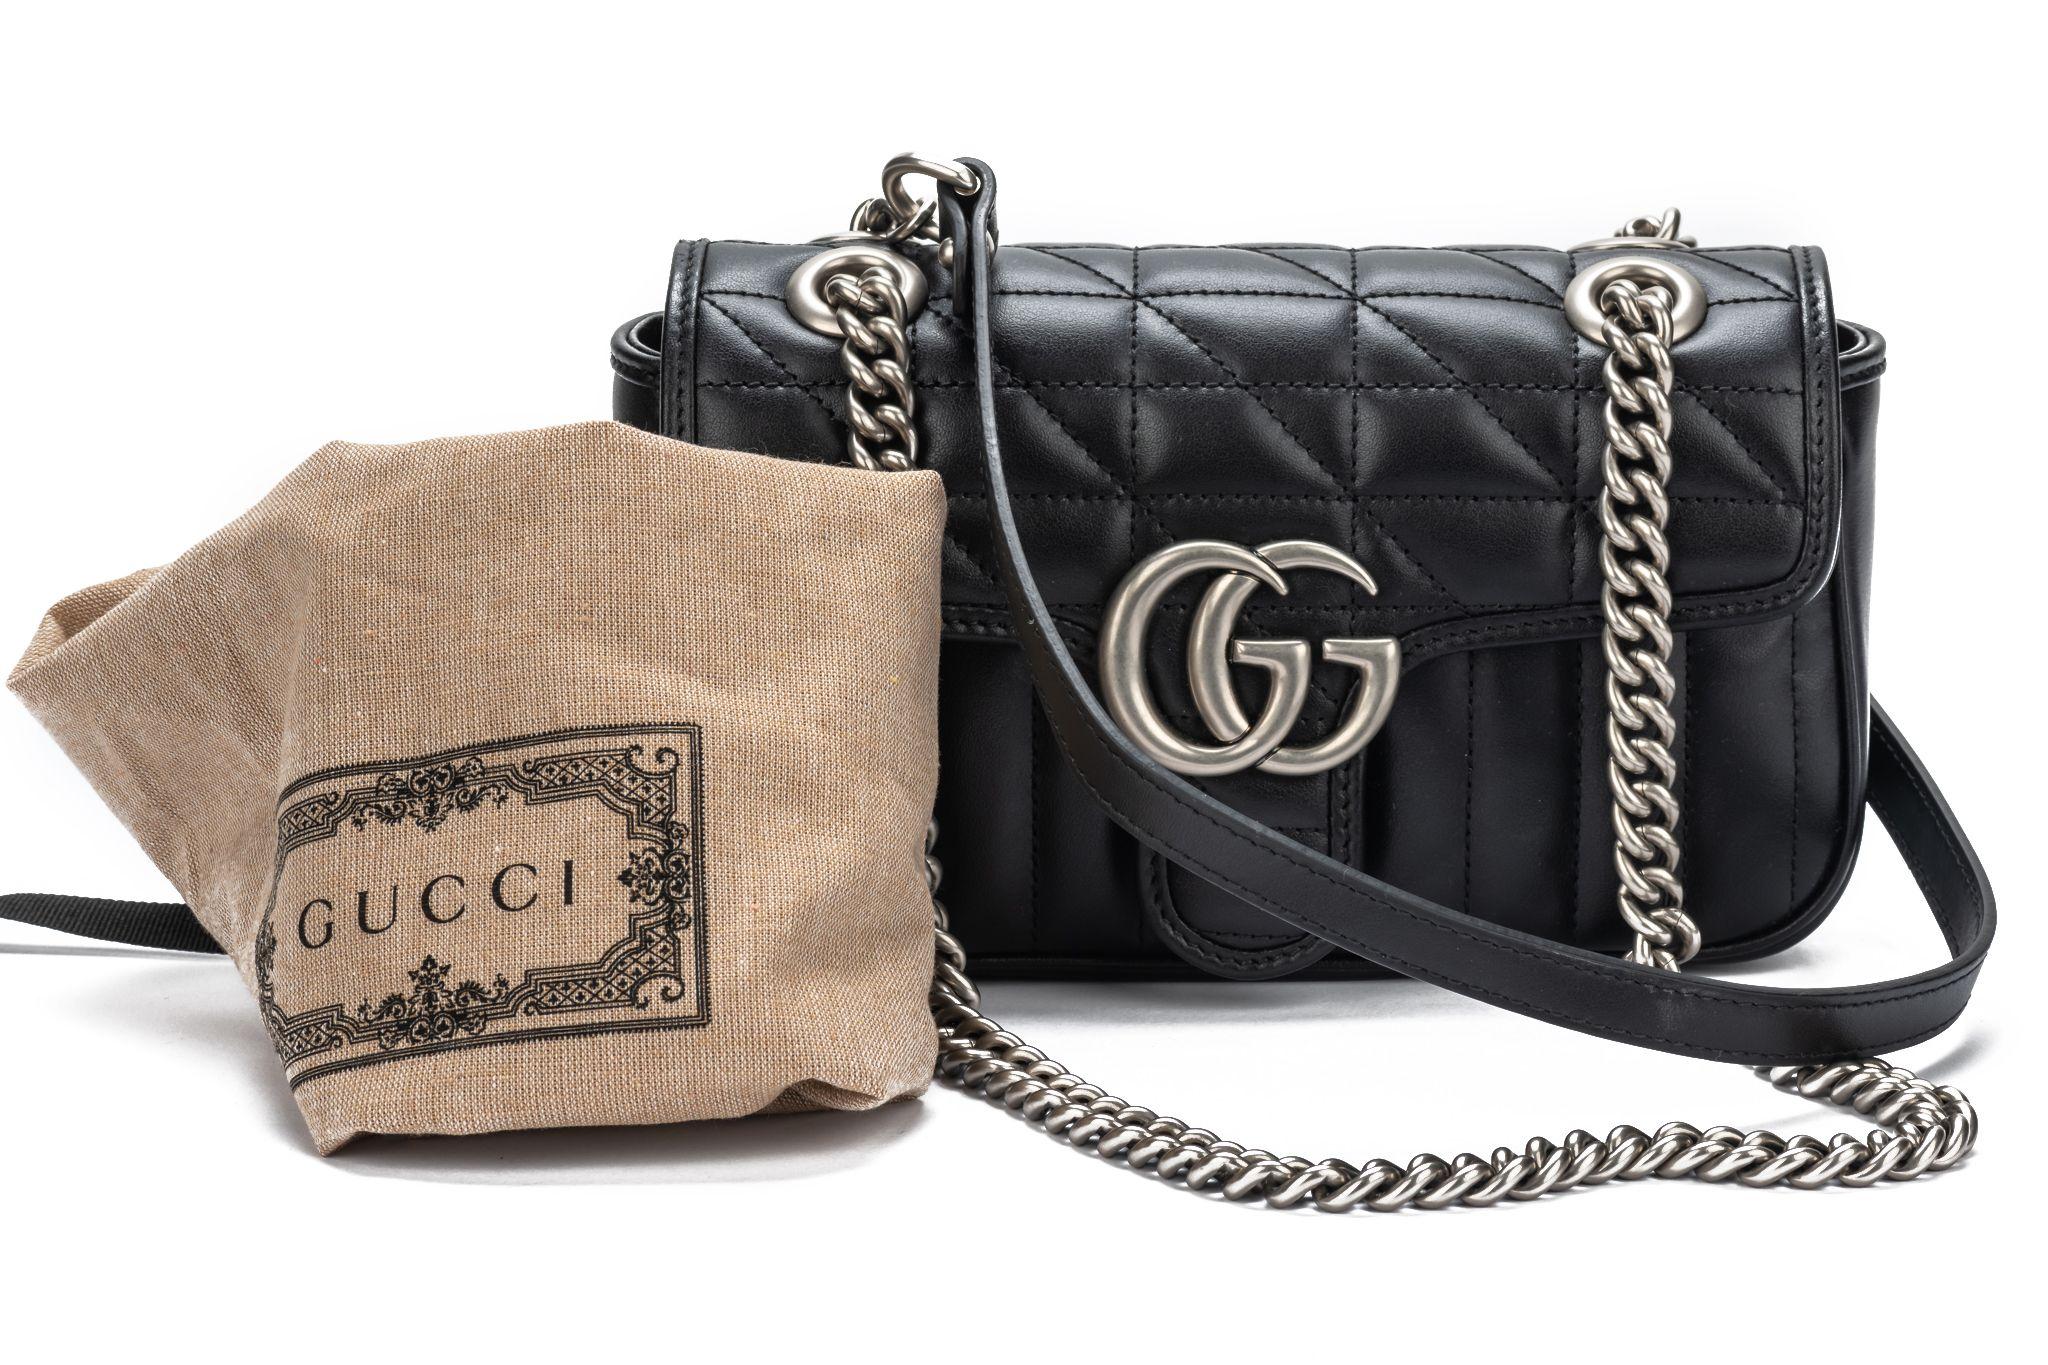 New Gucci Marmont Small Shoulder Bag in black. The straps measure 11' and are made of leather and metal. The interior is made of beige fabric. The bag comes with booklet and original dustcover. Store retail $2550.